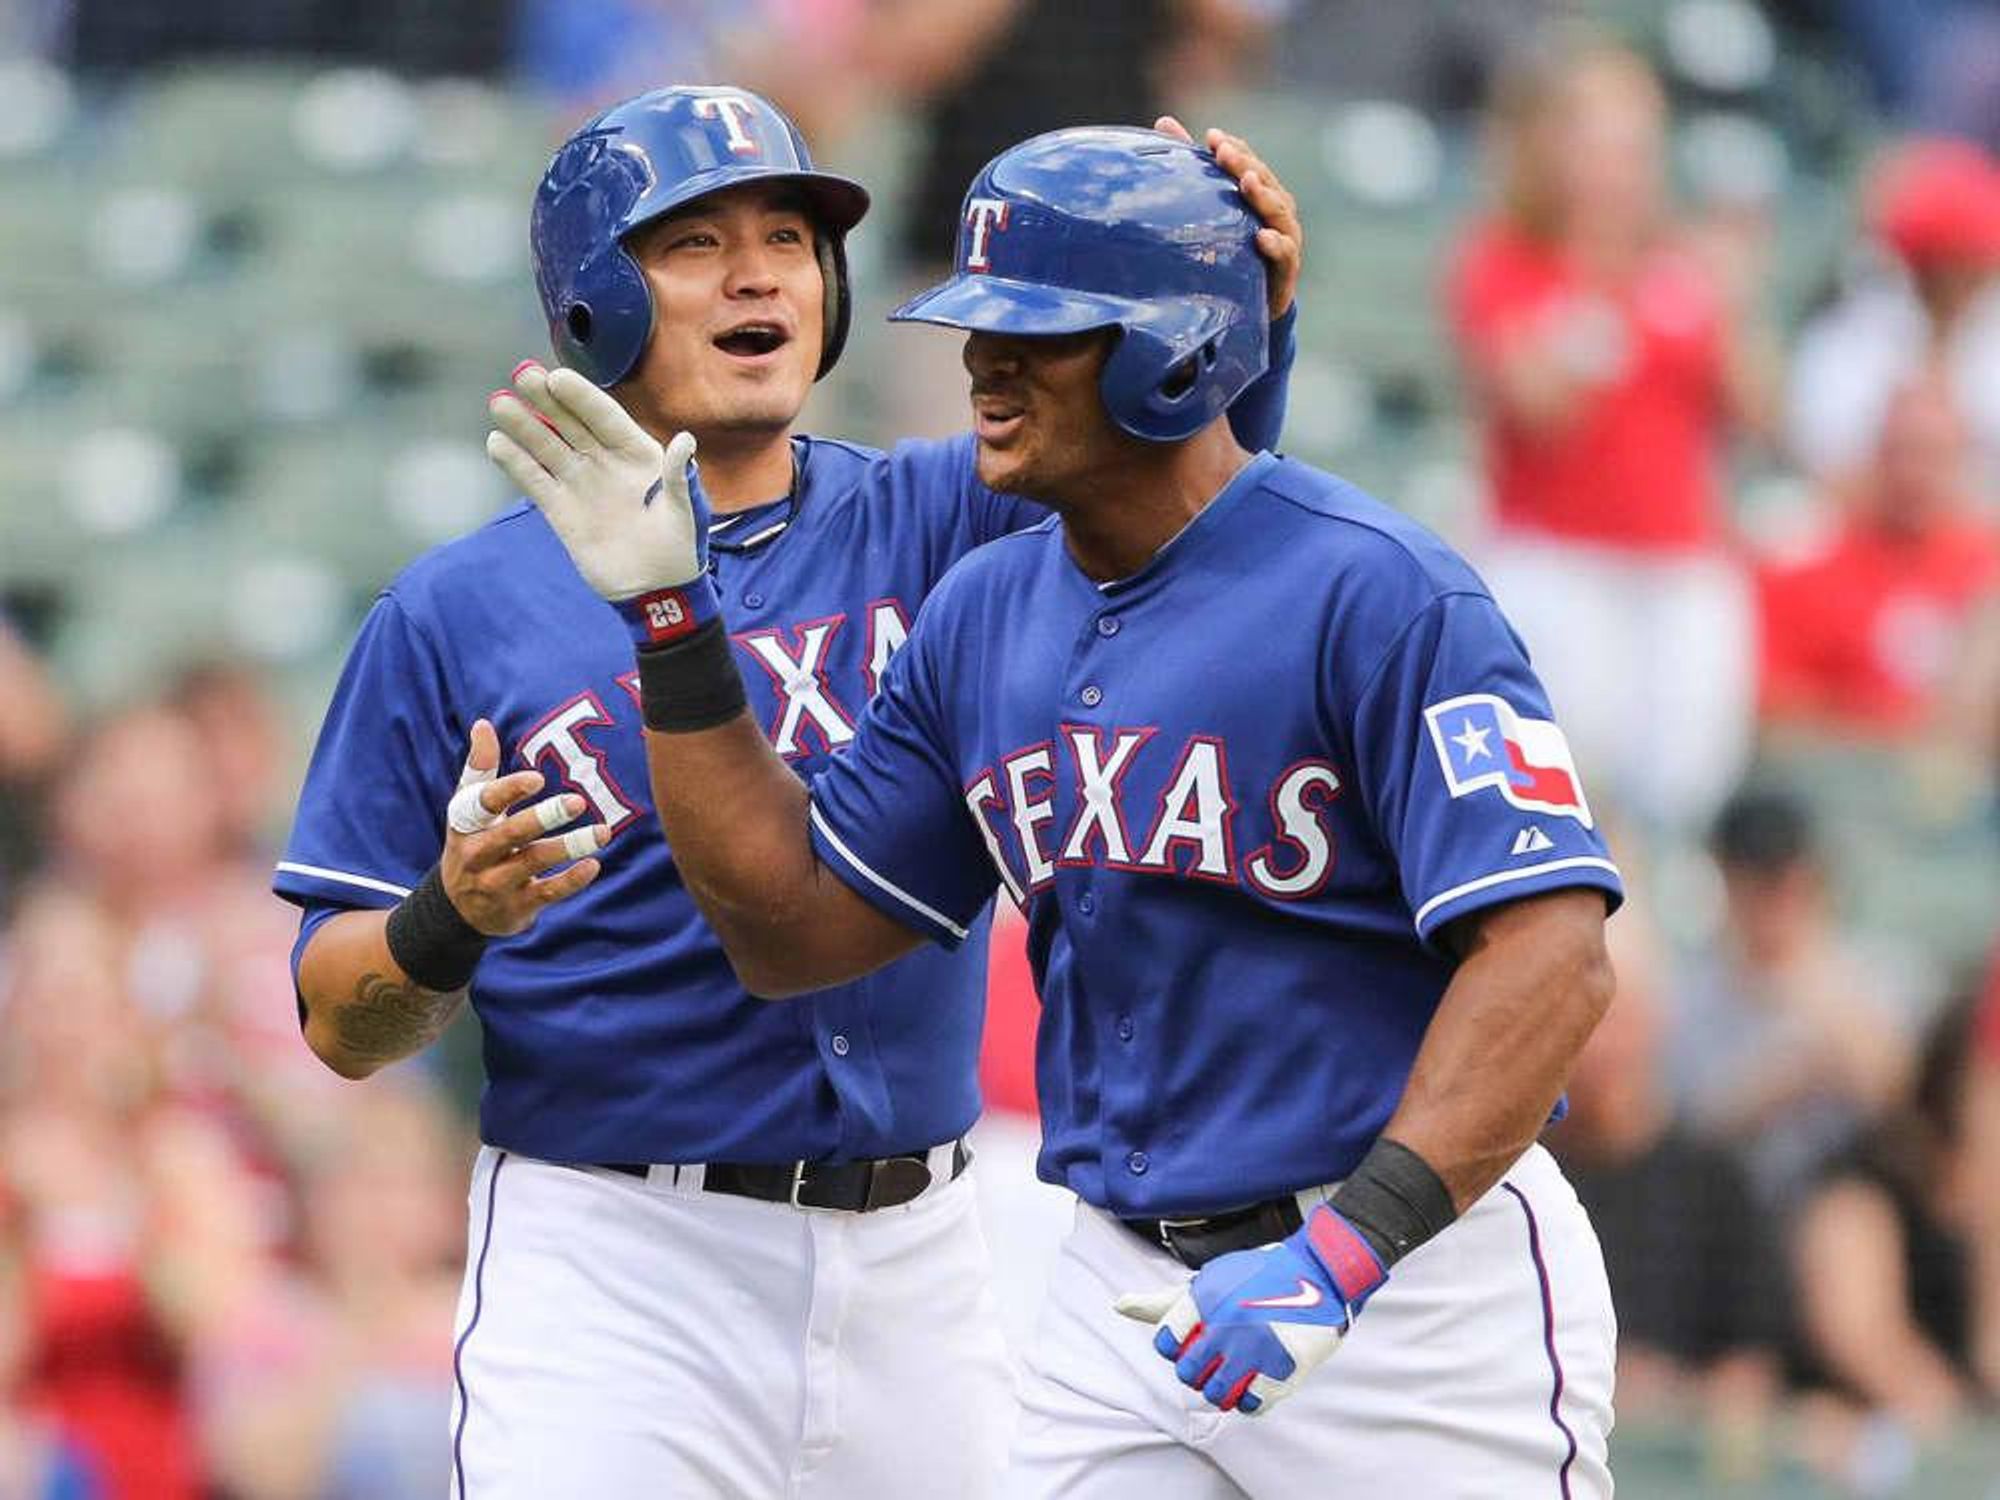 Adrian Beltre Signed by Texas Rangers: What This Means for 5